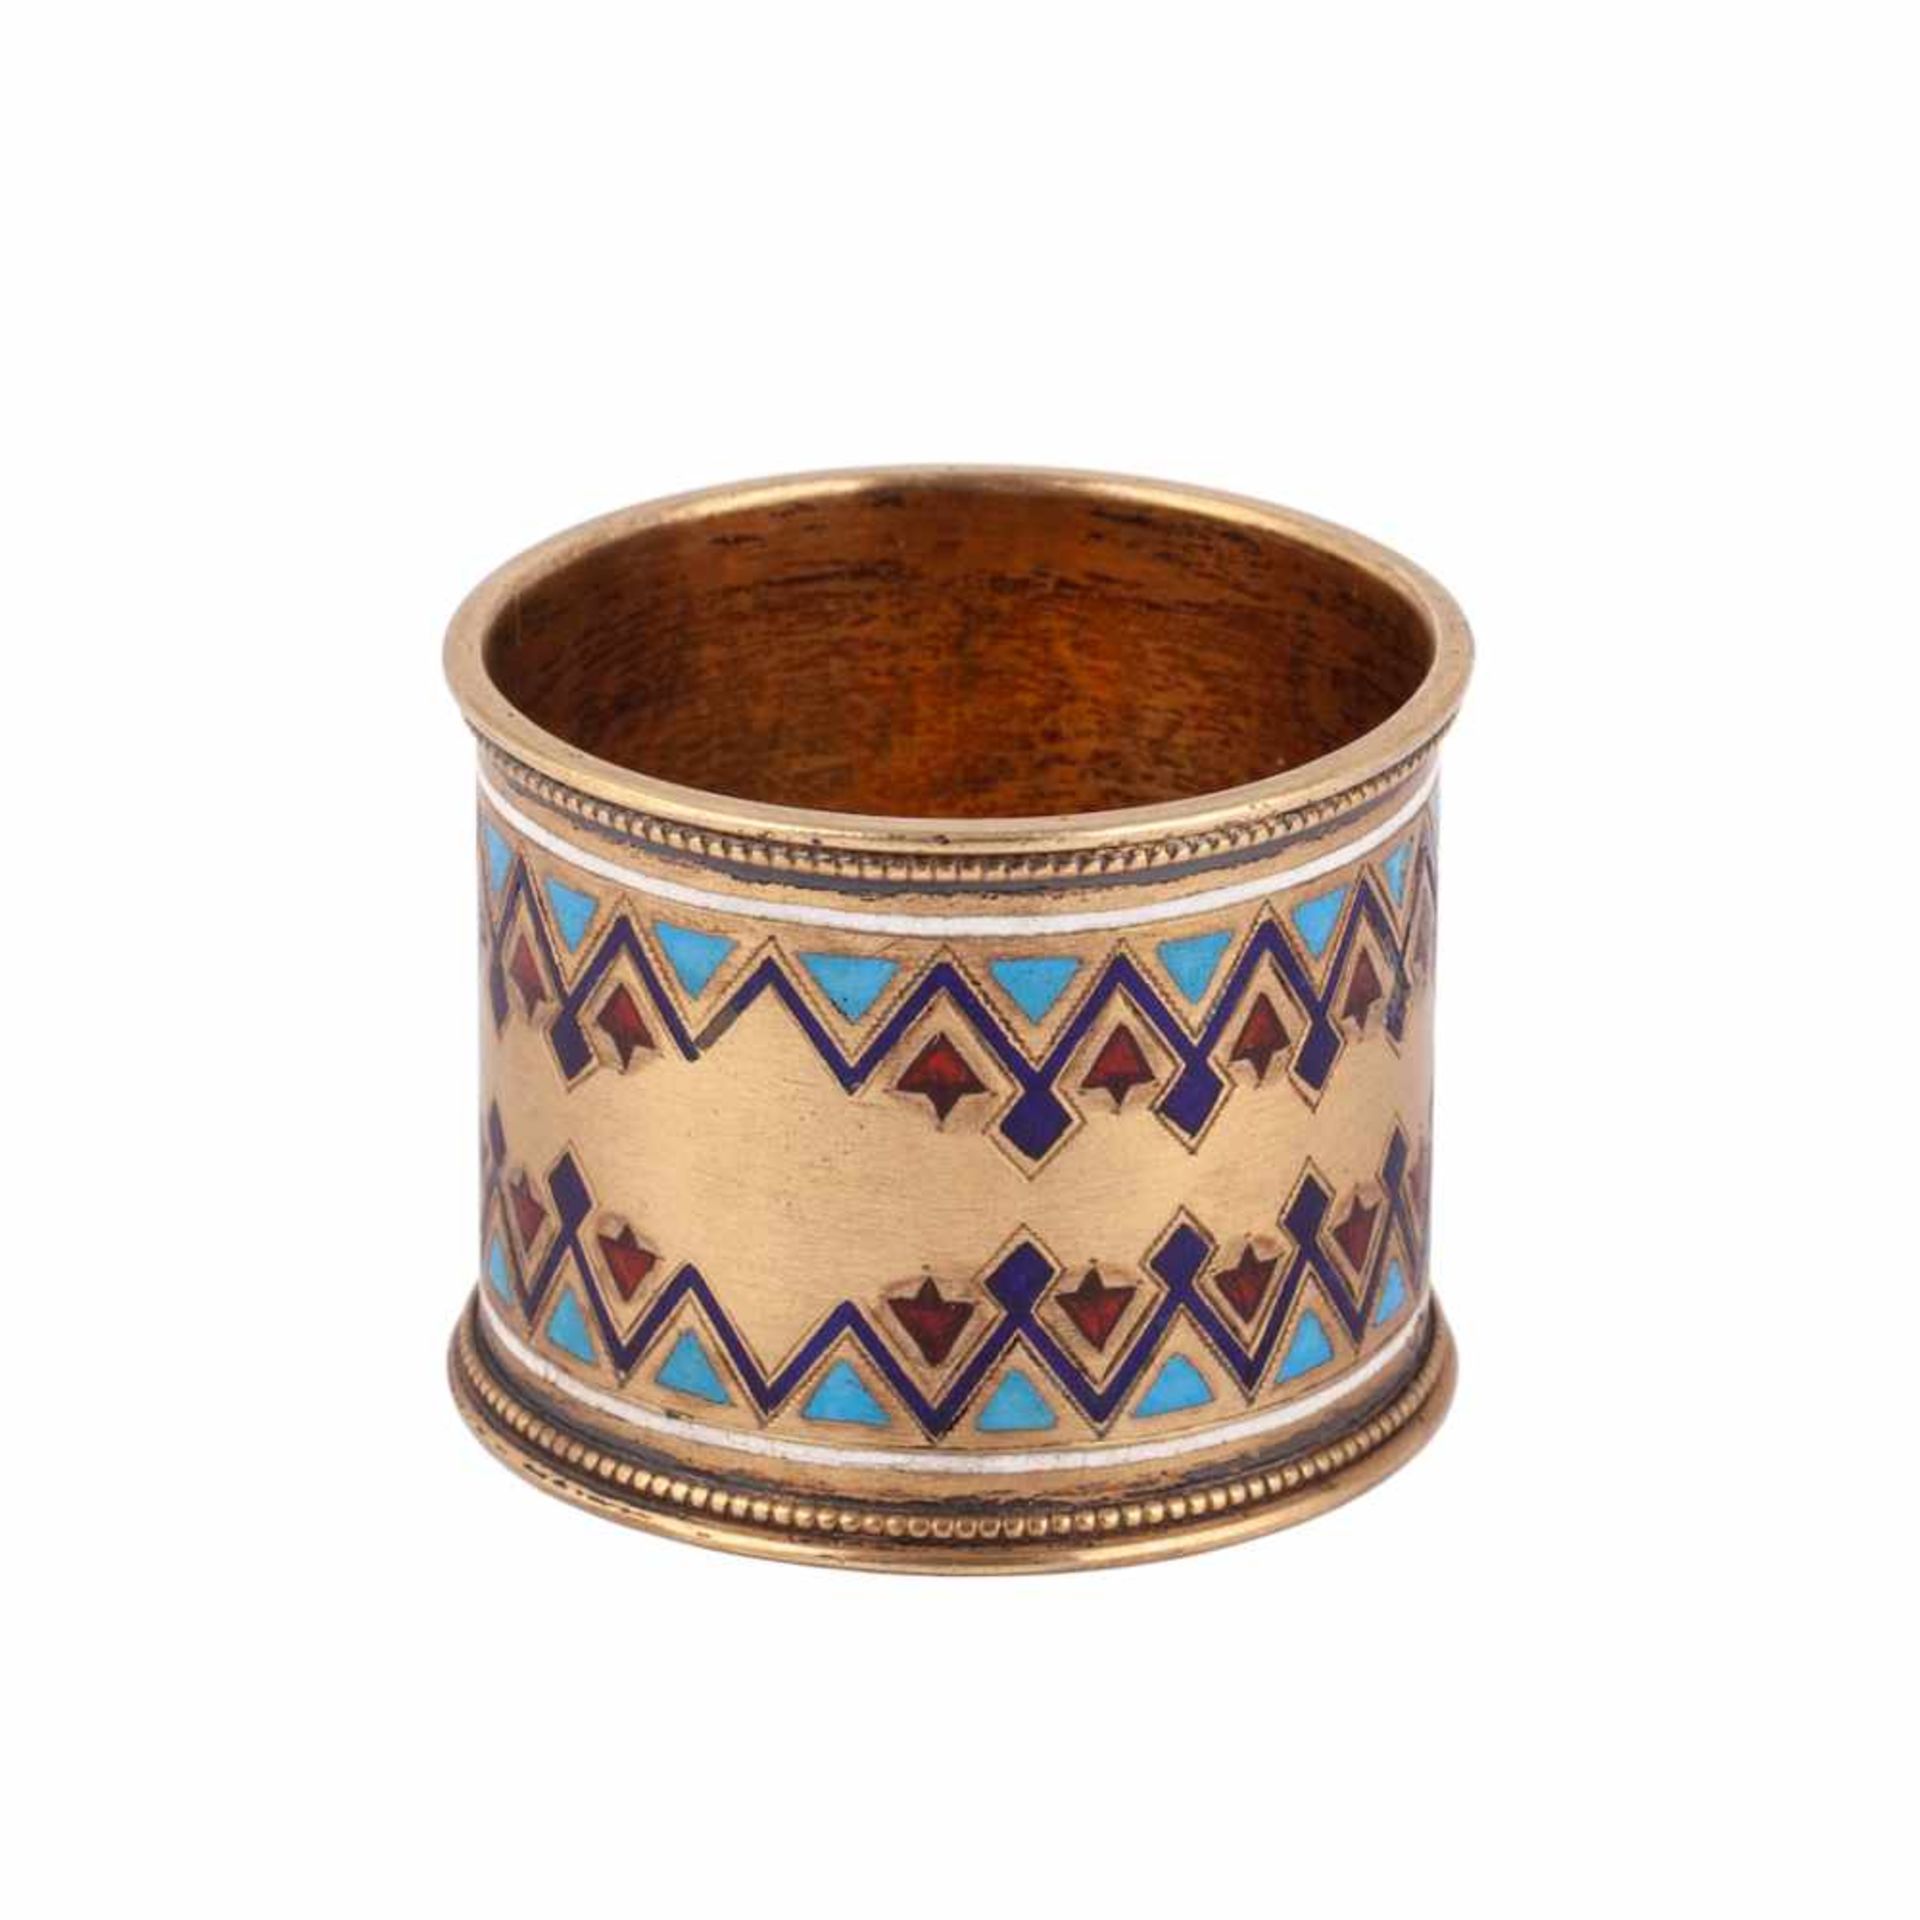 A Russian silver and enamel napkin ring